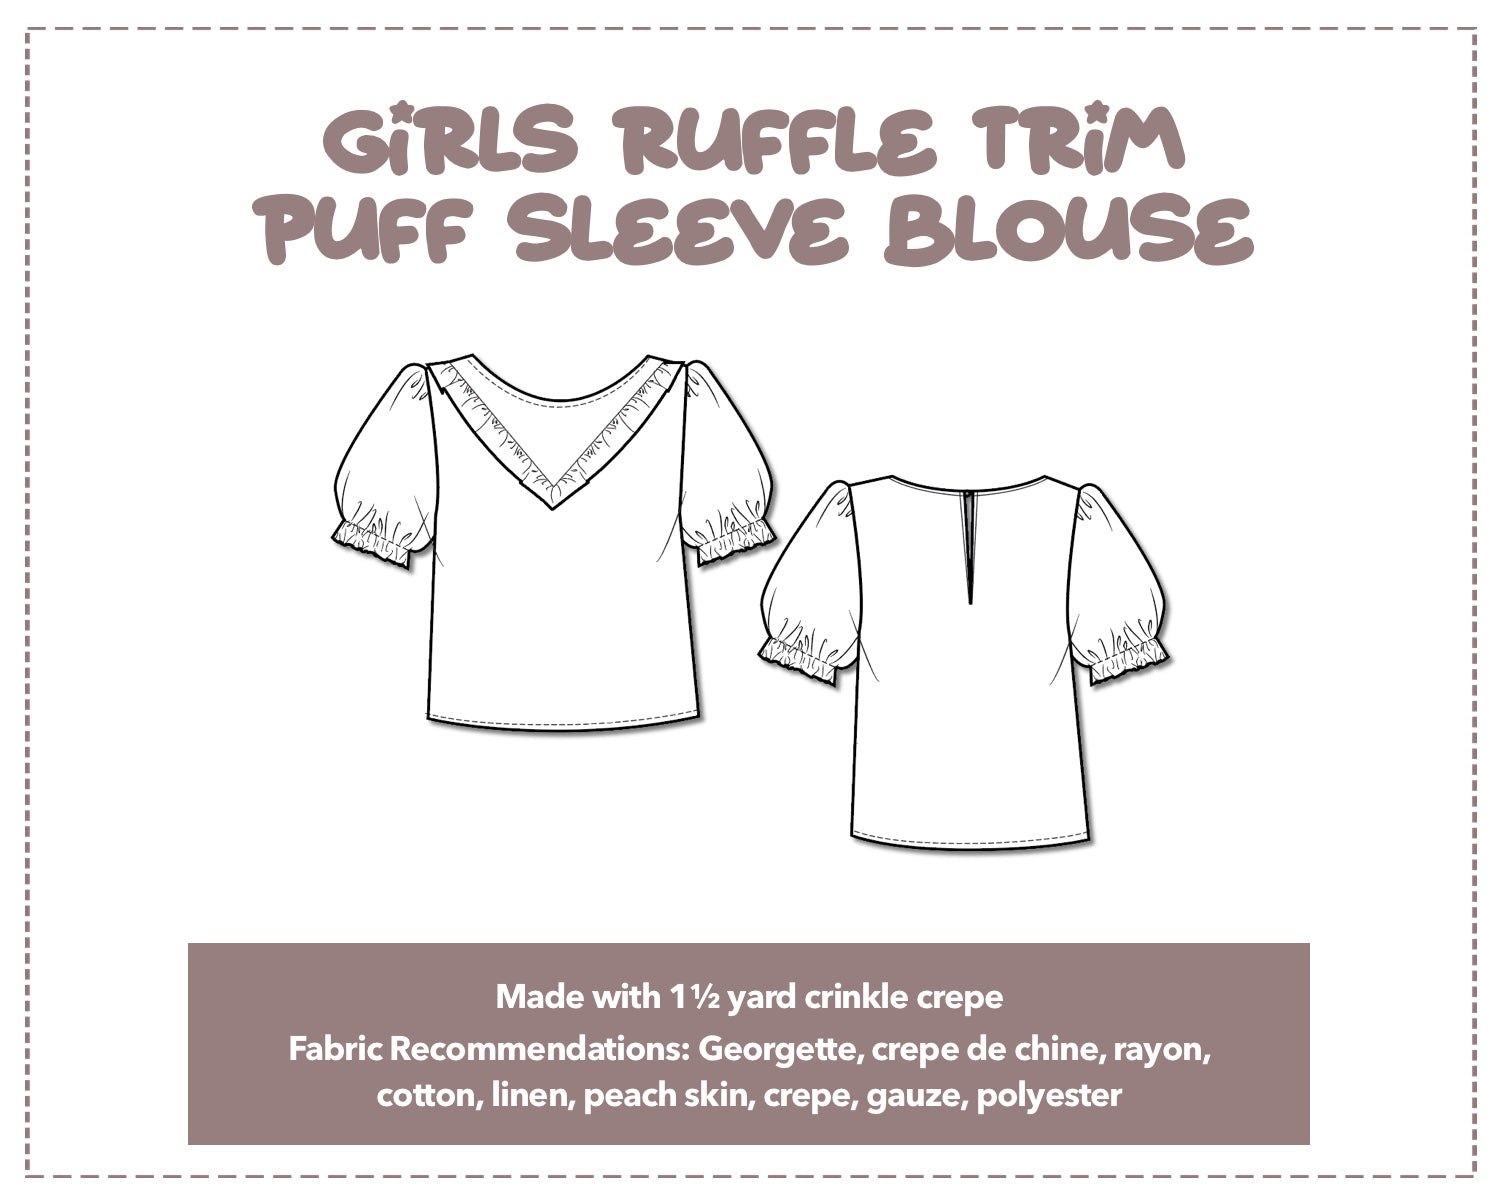 Illustration and detailed description for Ruffle Trim Puff Sleeve Blouse sewing pattern.